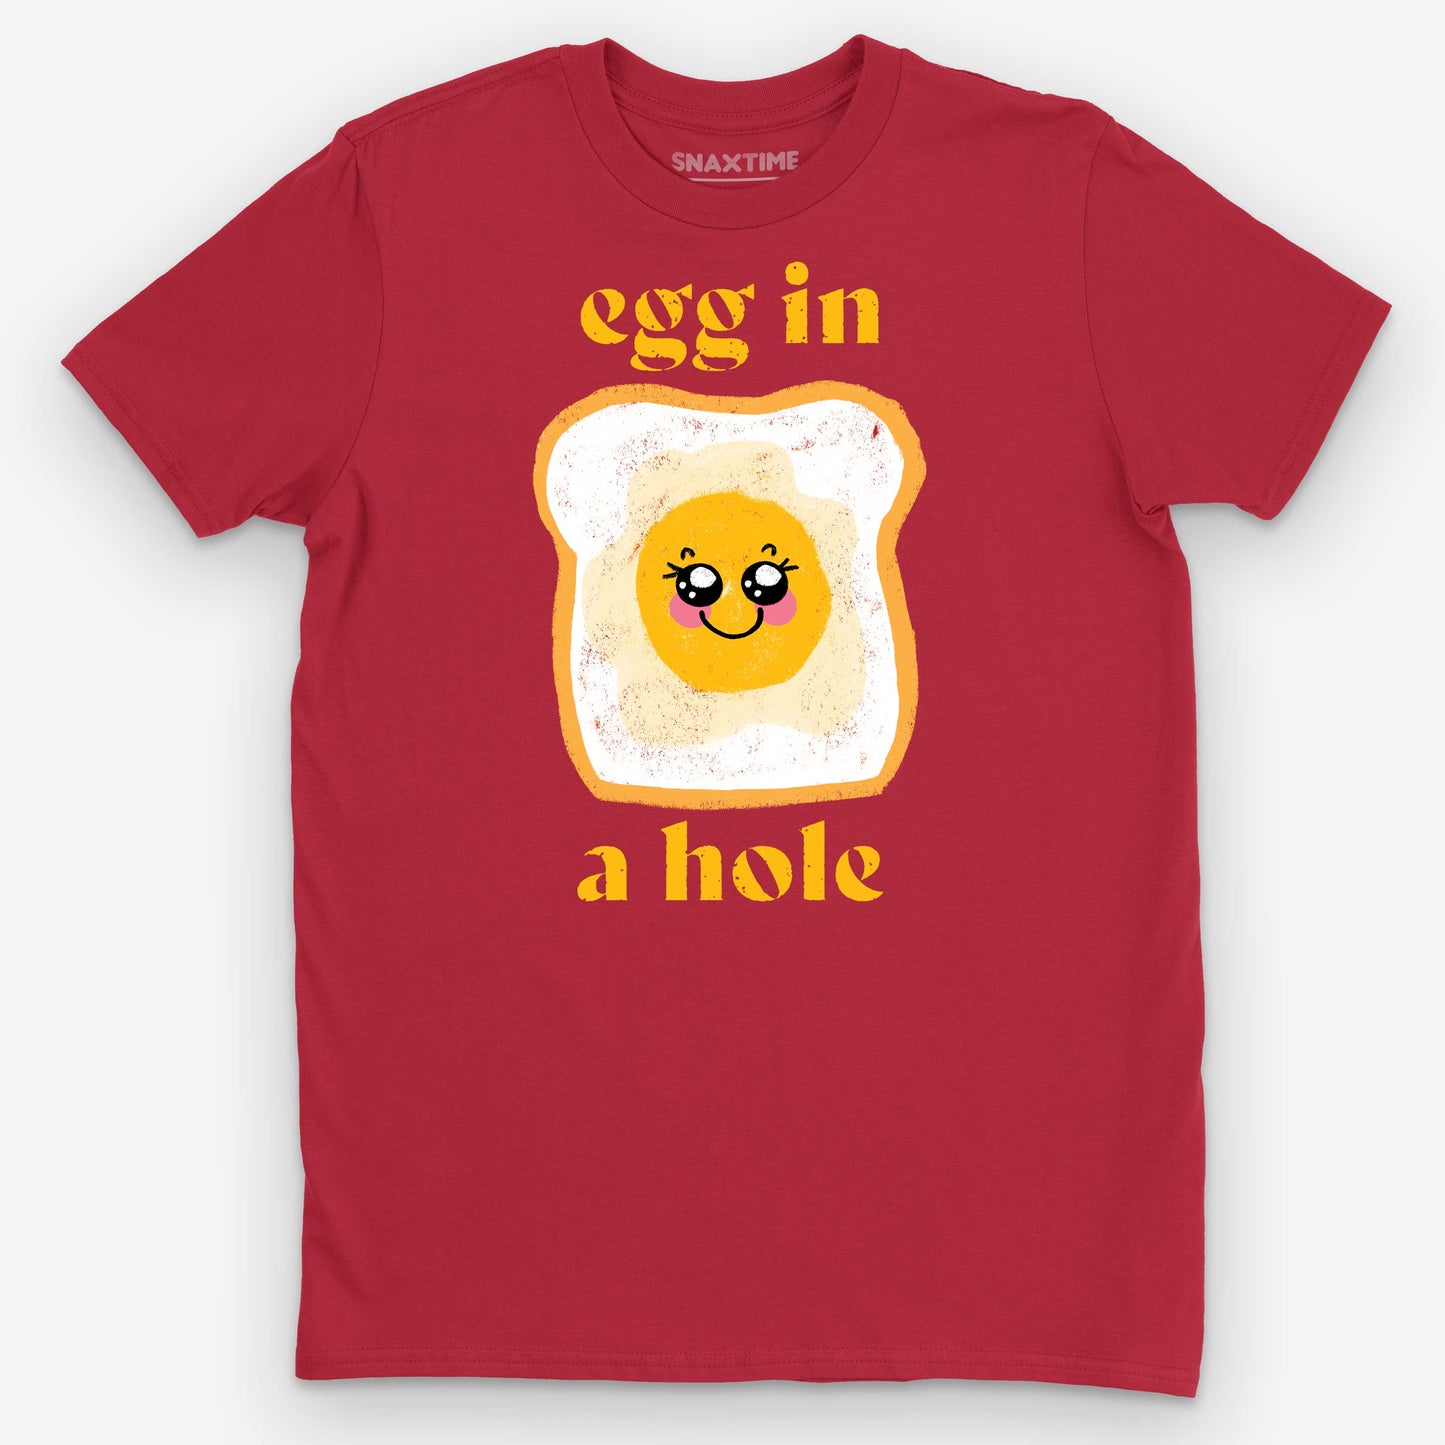 Red Egg in a Hole Graphic T-Shirt by Snaxtime